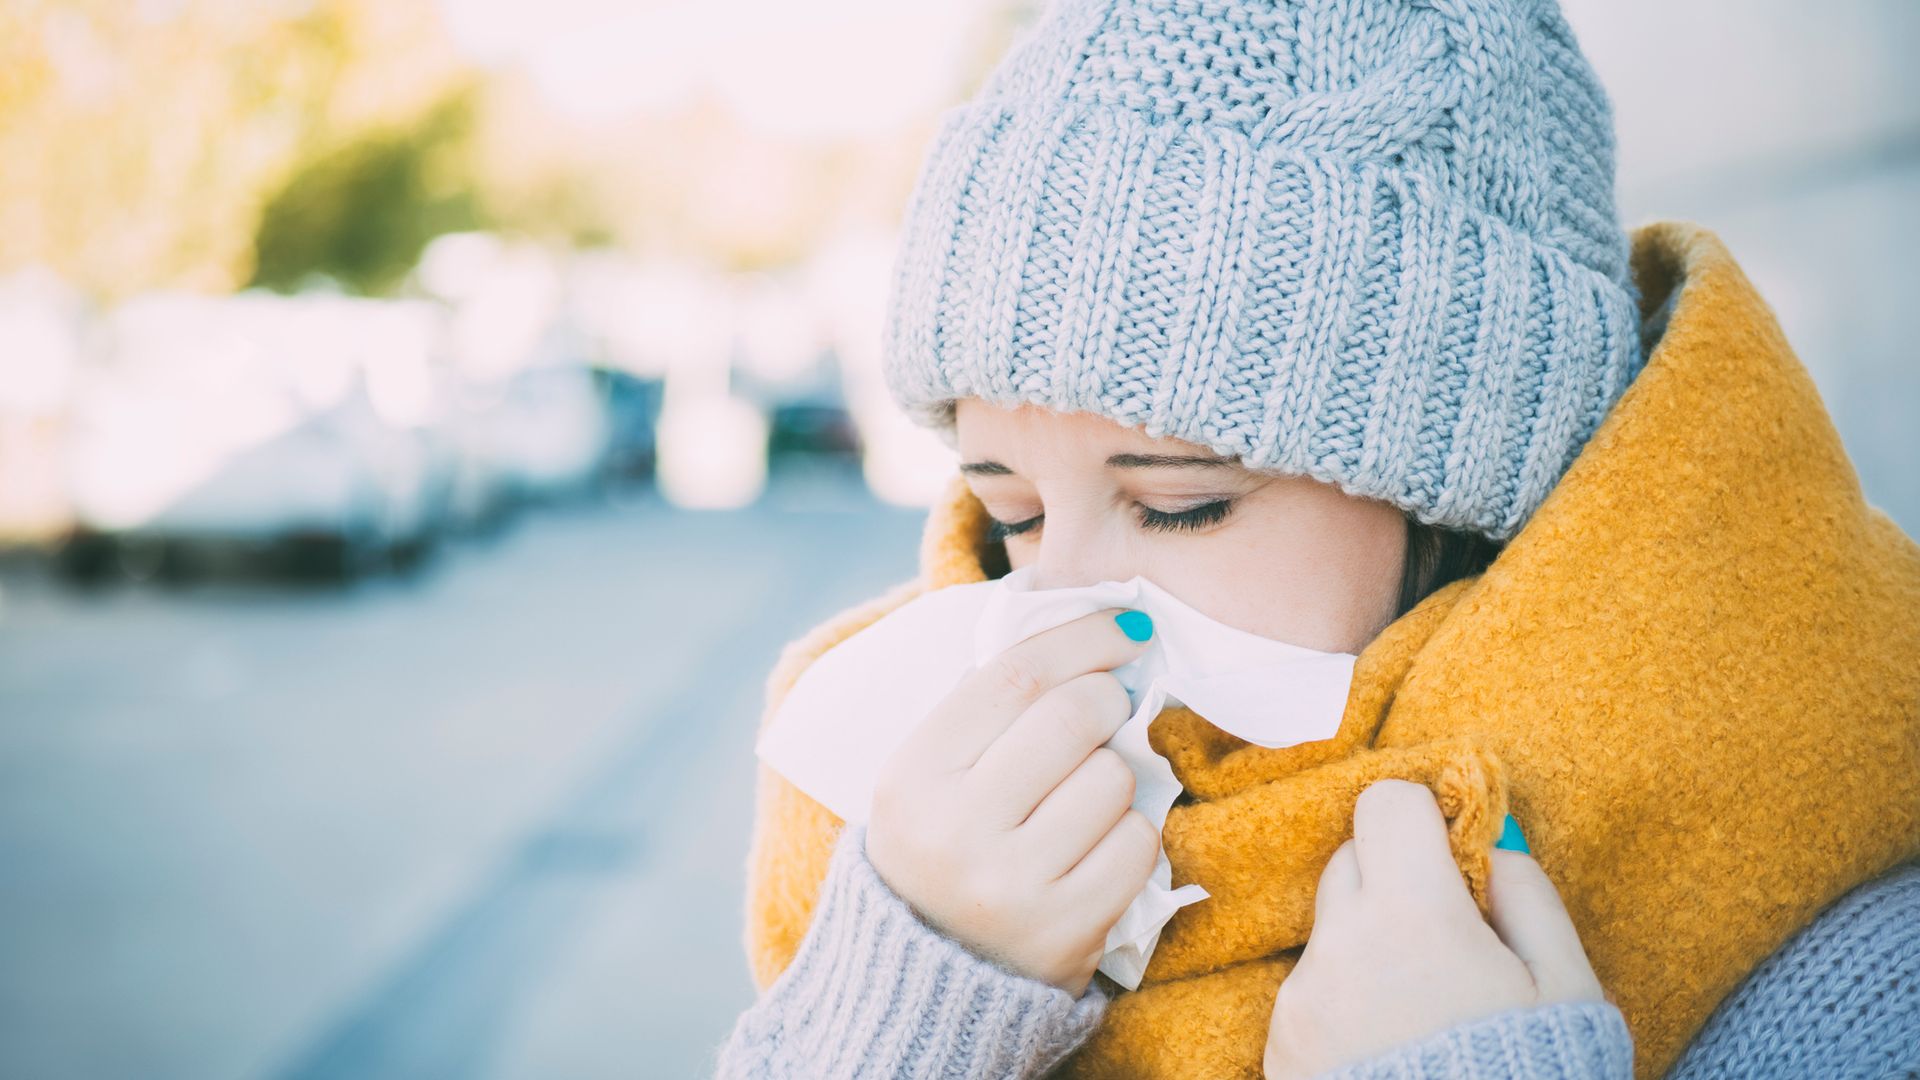 Coping with the Cold, How to Stay Cheerful During the Long Cold